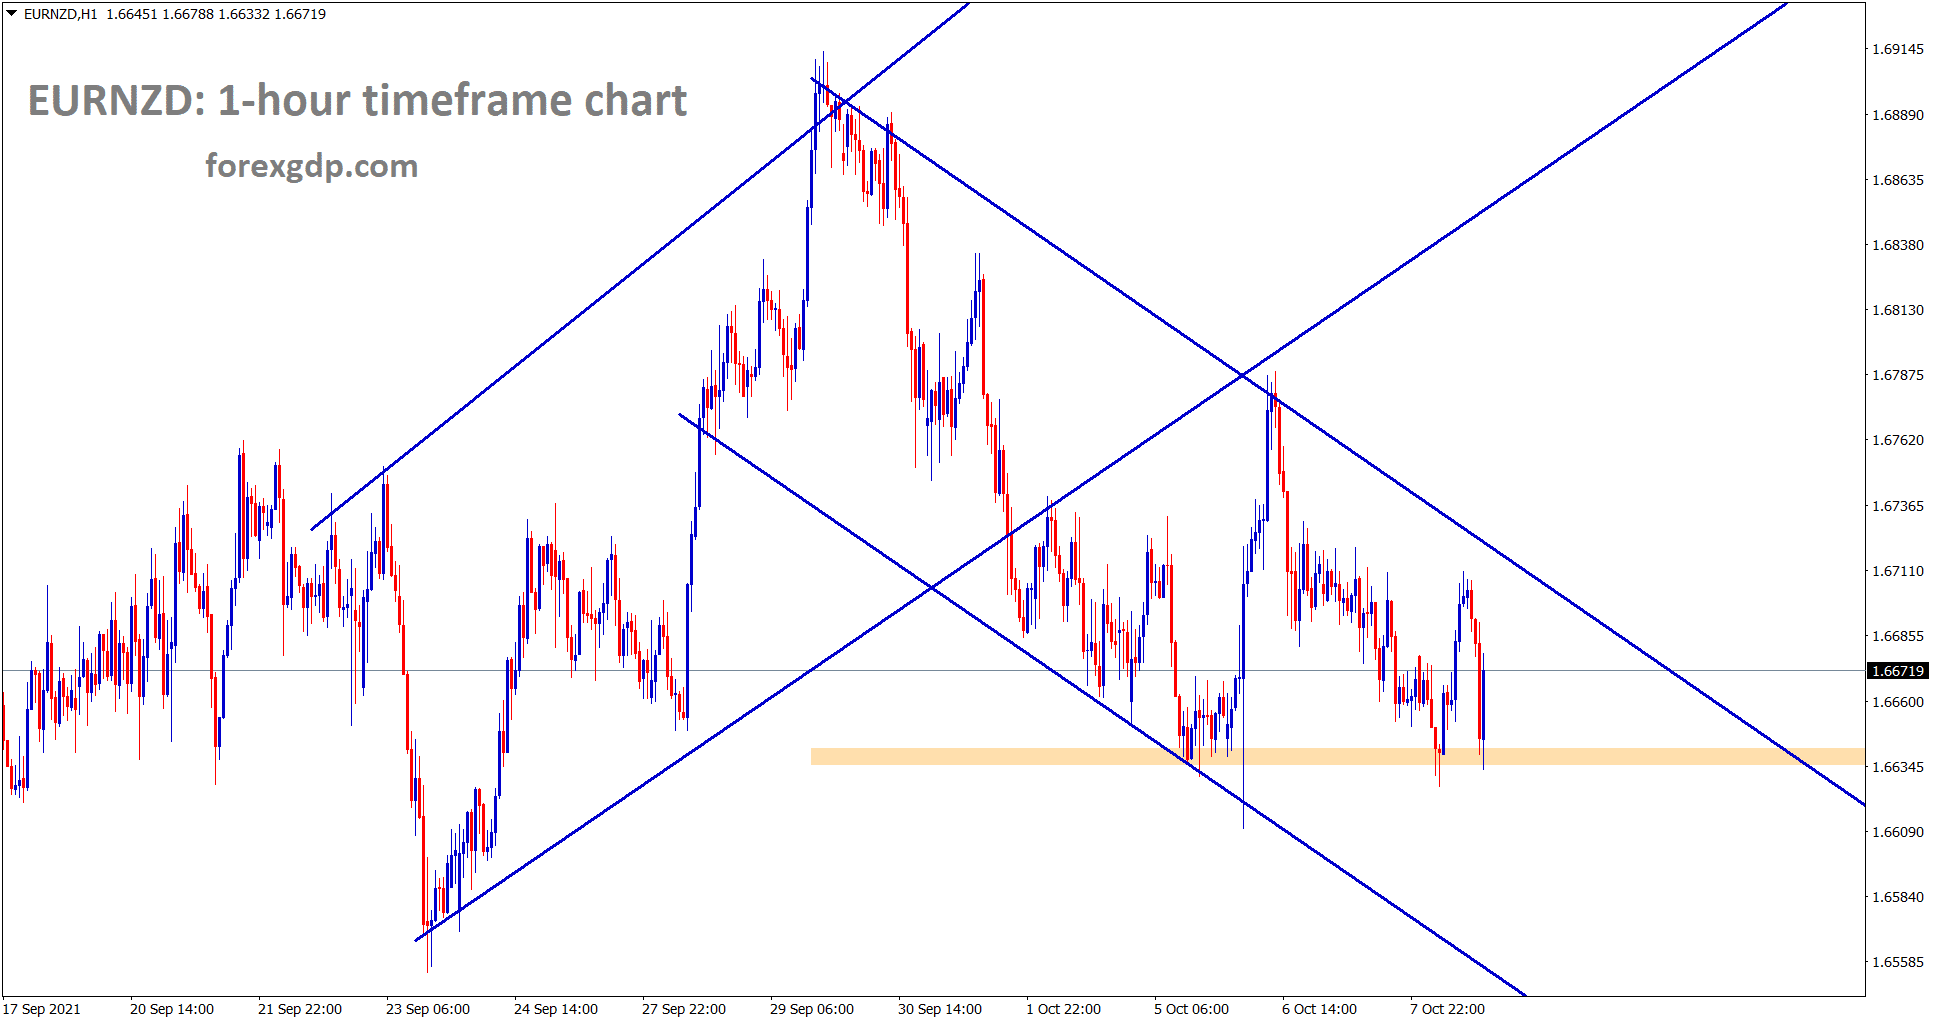 EURNZD is moving in a descending channel and ranging from the horizontal support